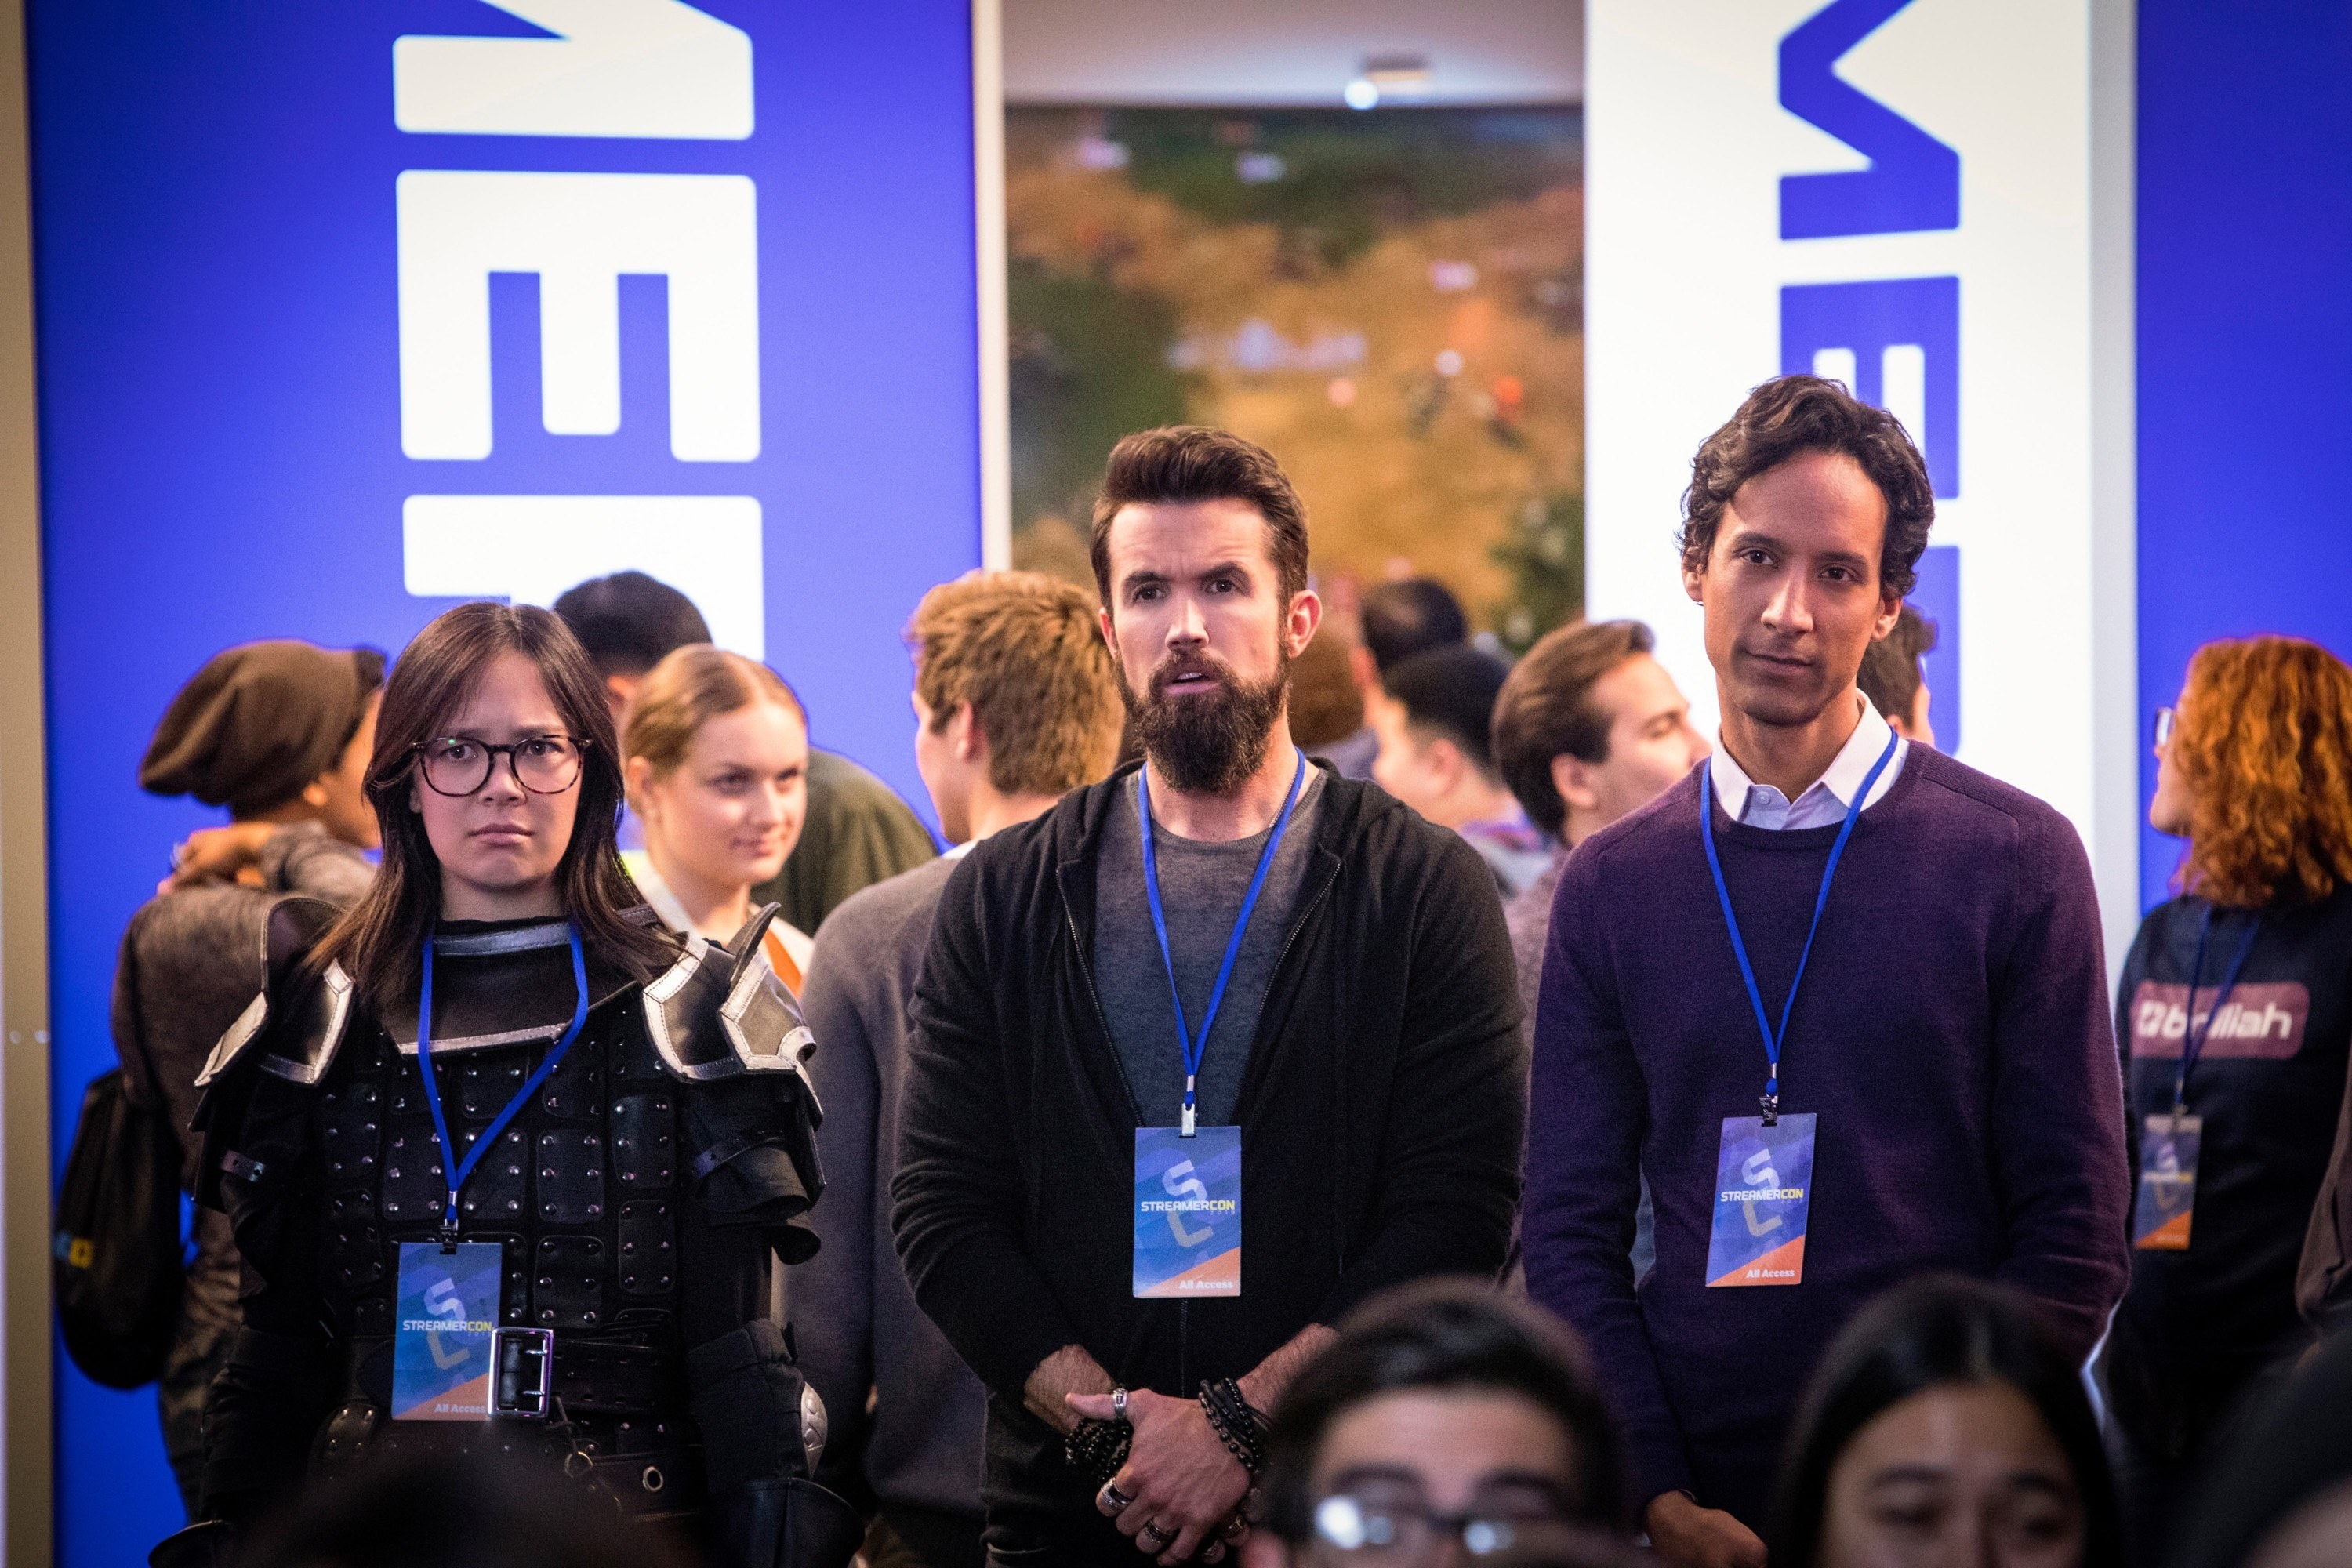 Charlotte Nicdao, Rob McElhenney, and Danny Pudi stand at a convention